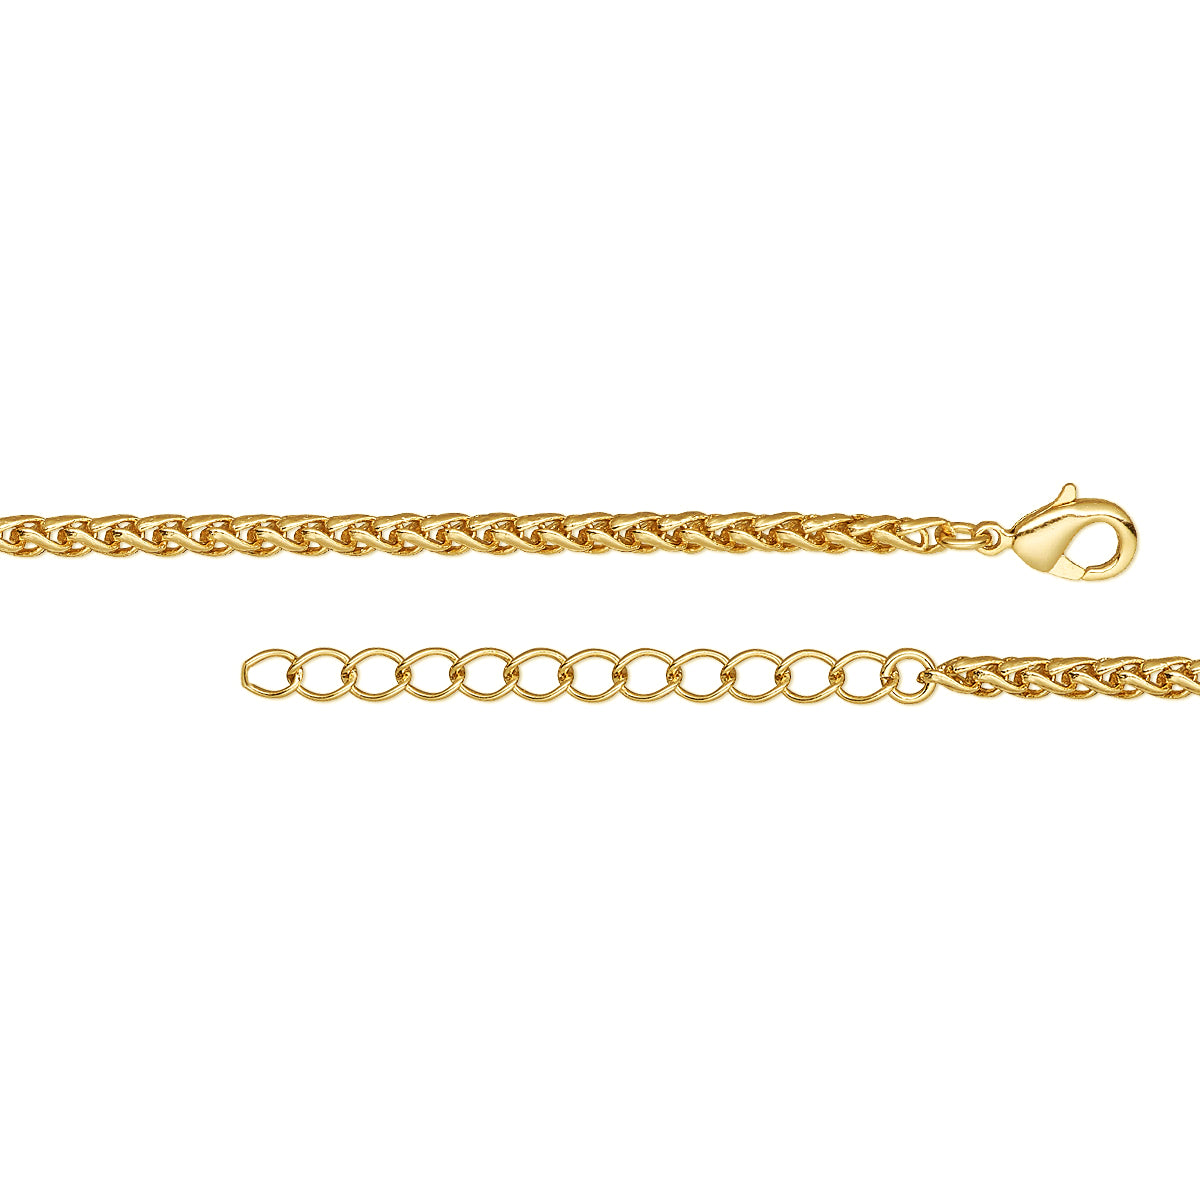 14K Solid Gold Extender, Gold Necklace Extender, Adjustable Link Extension, 14k  Gold Cable Chain Extender 1 or 2 Inches 